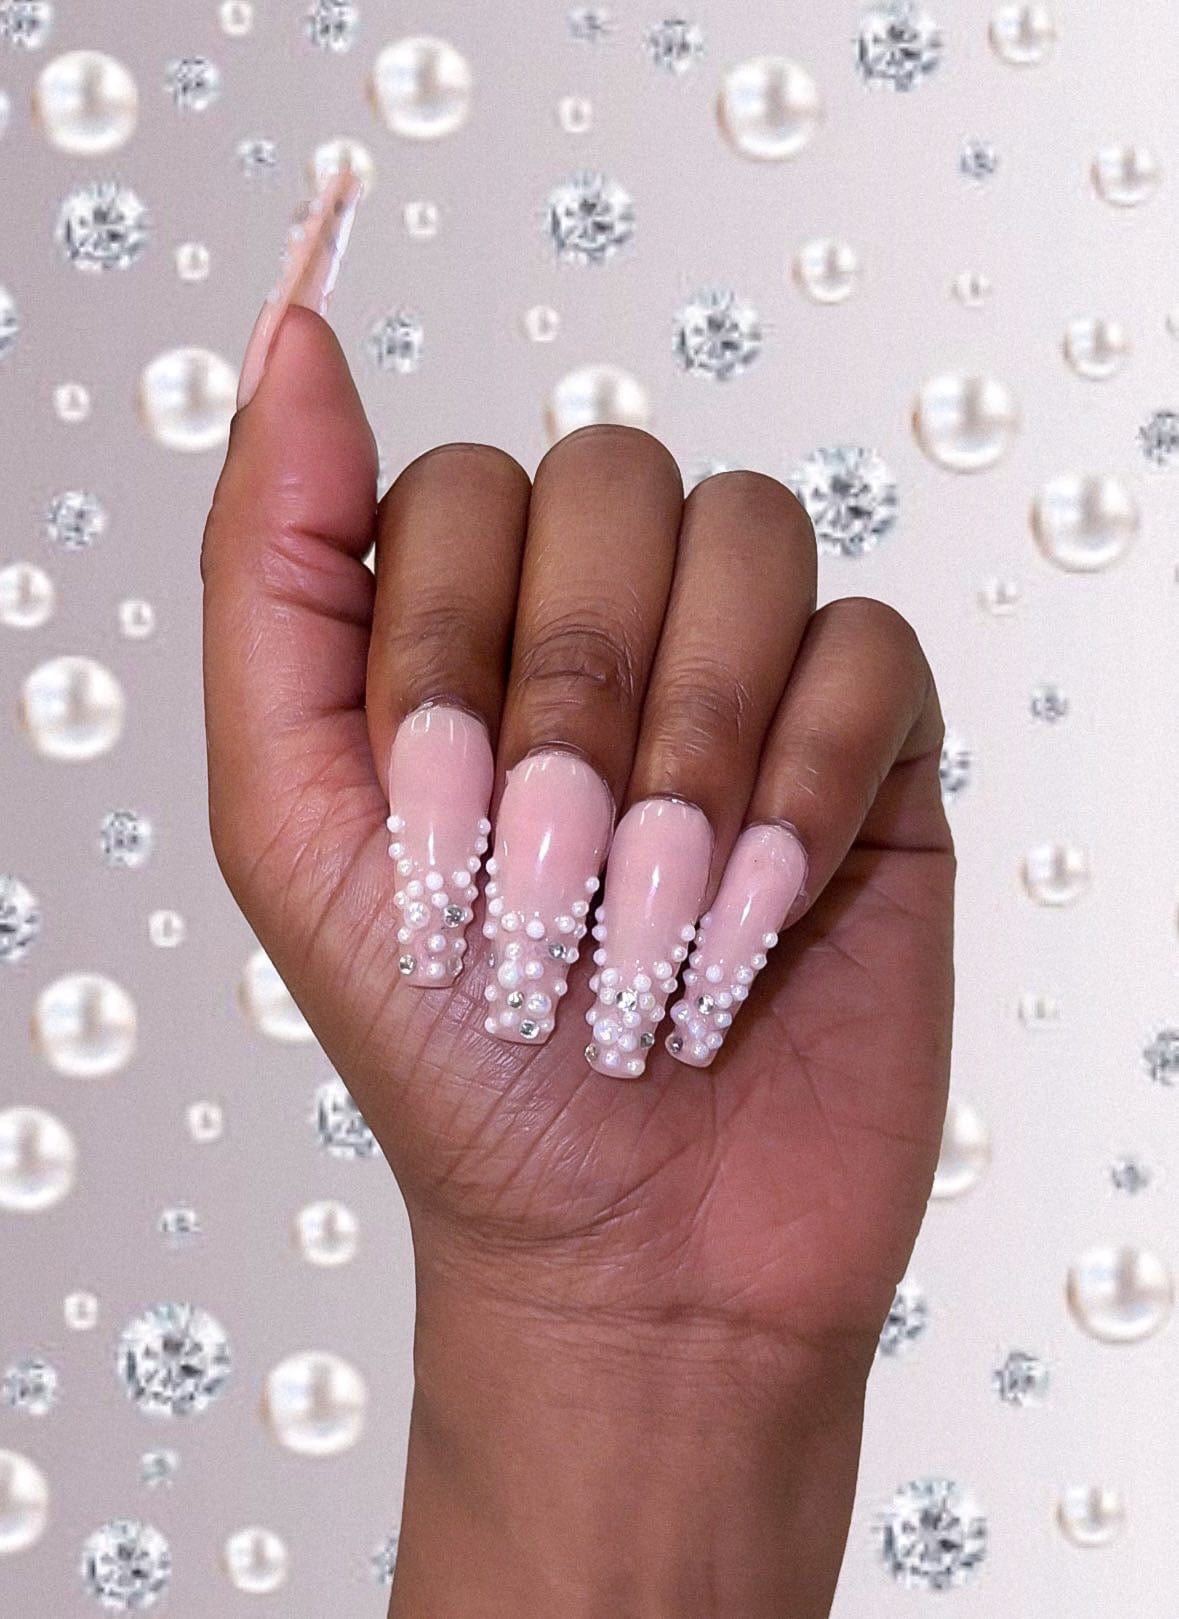 NailedByNiki2swt Beauty and Nails Diamonds & Pearls Press on Nails Self Care Accessories